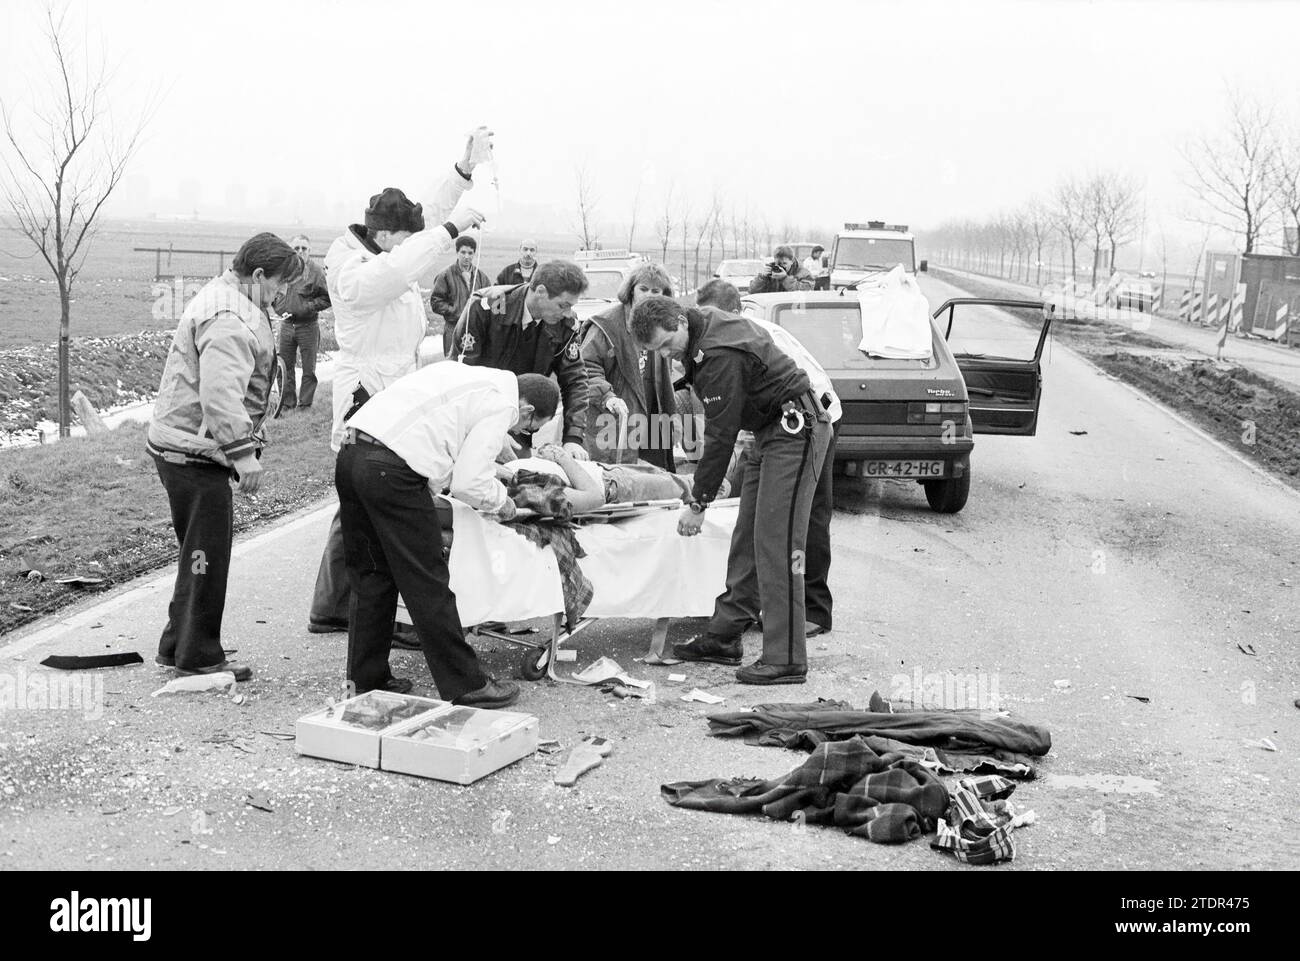 Accident, Schipholweg, Schipholweg, 24-02-1994, Whizgle News from the Past, Tailored for the Future. Explore historical narratives, Dutch The Netherlands agency image with a modern perspective, bridging the gap between yesterday's events and tomorrow's insights. A timeless journey shaping the stories that shape our future Stock Photo